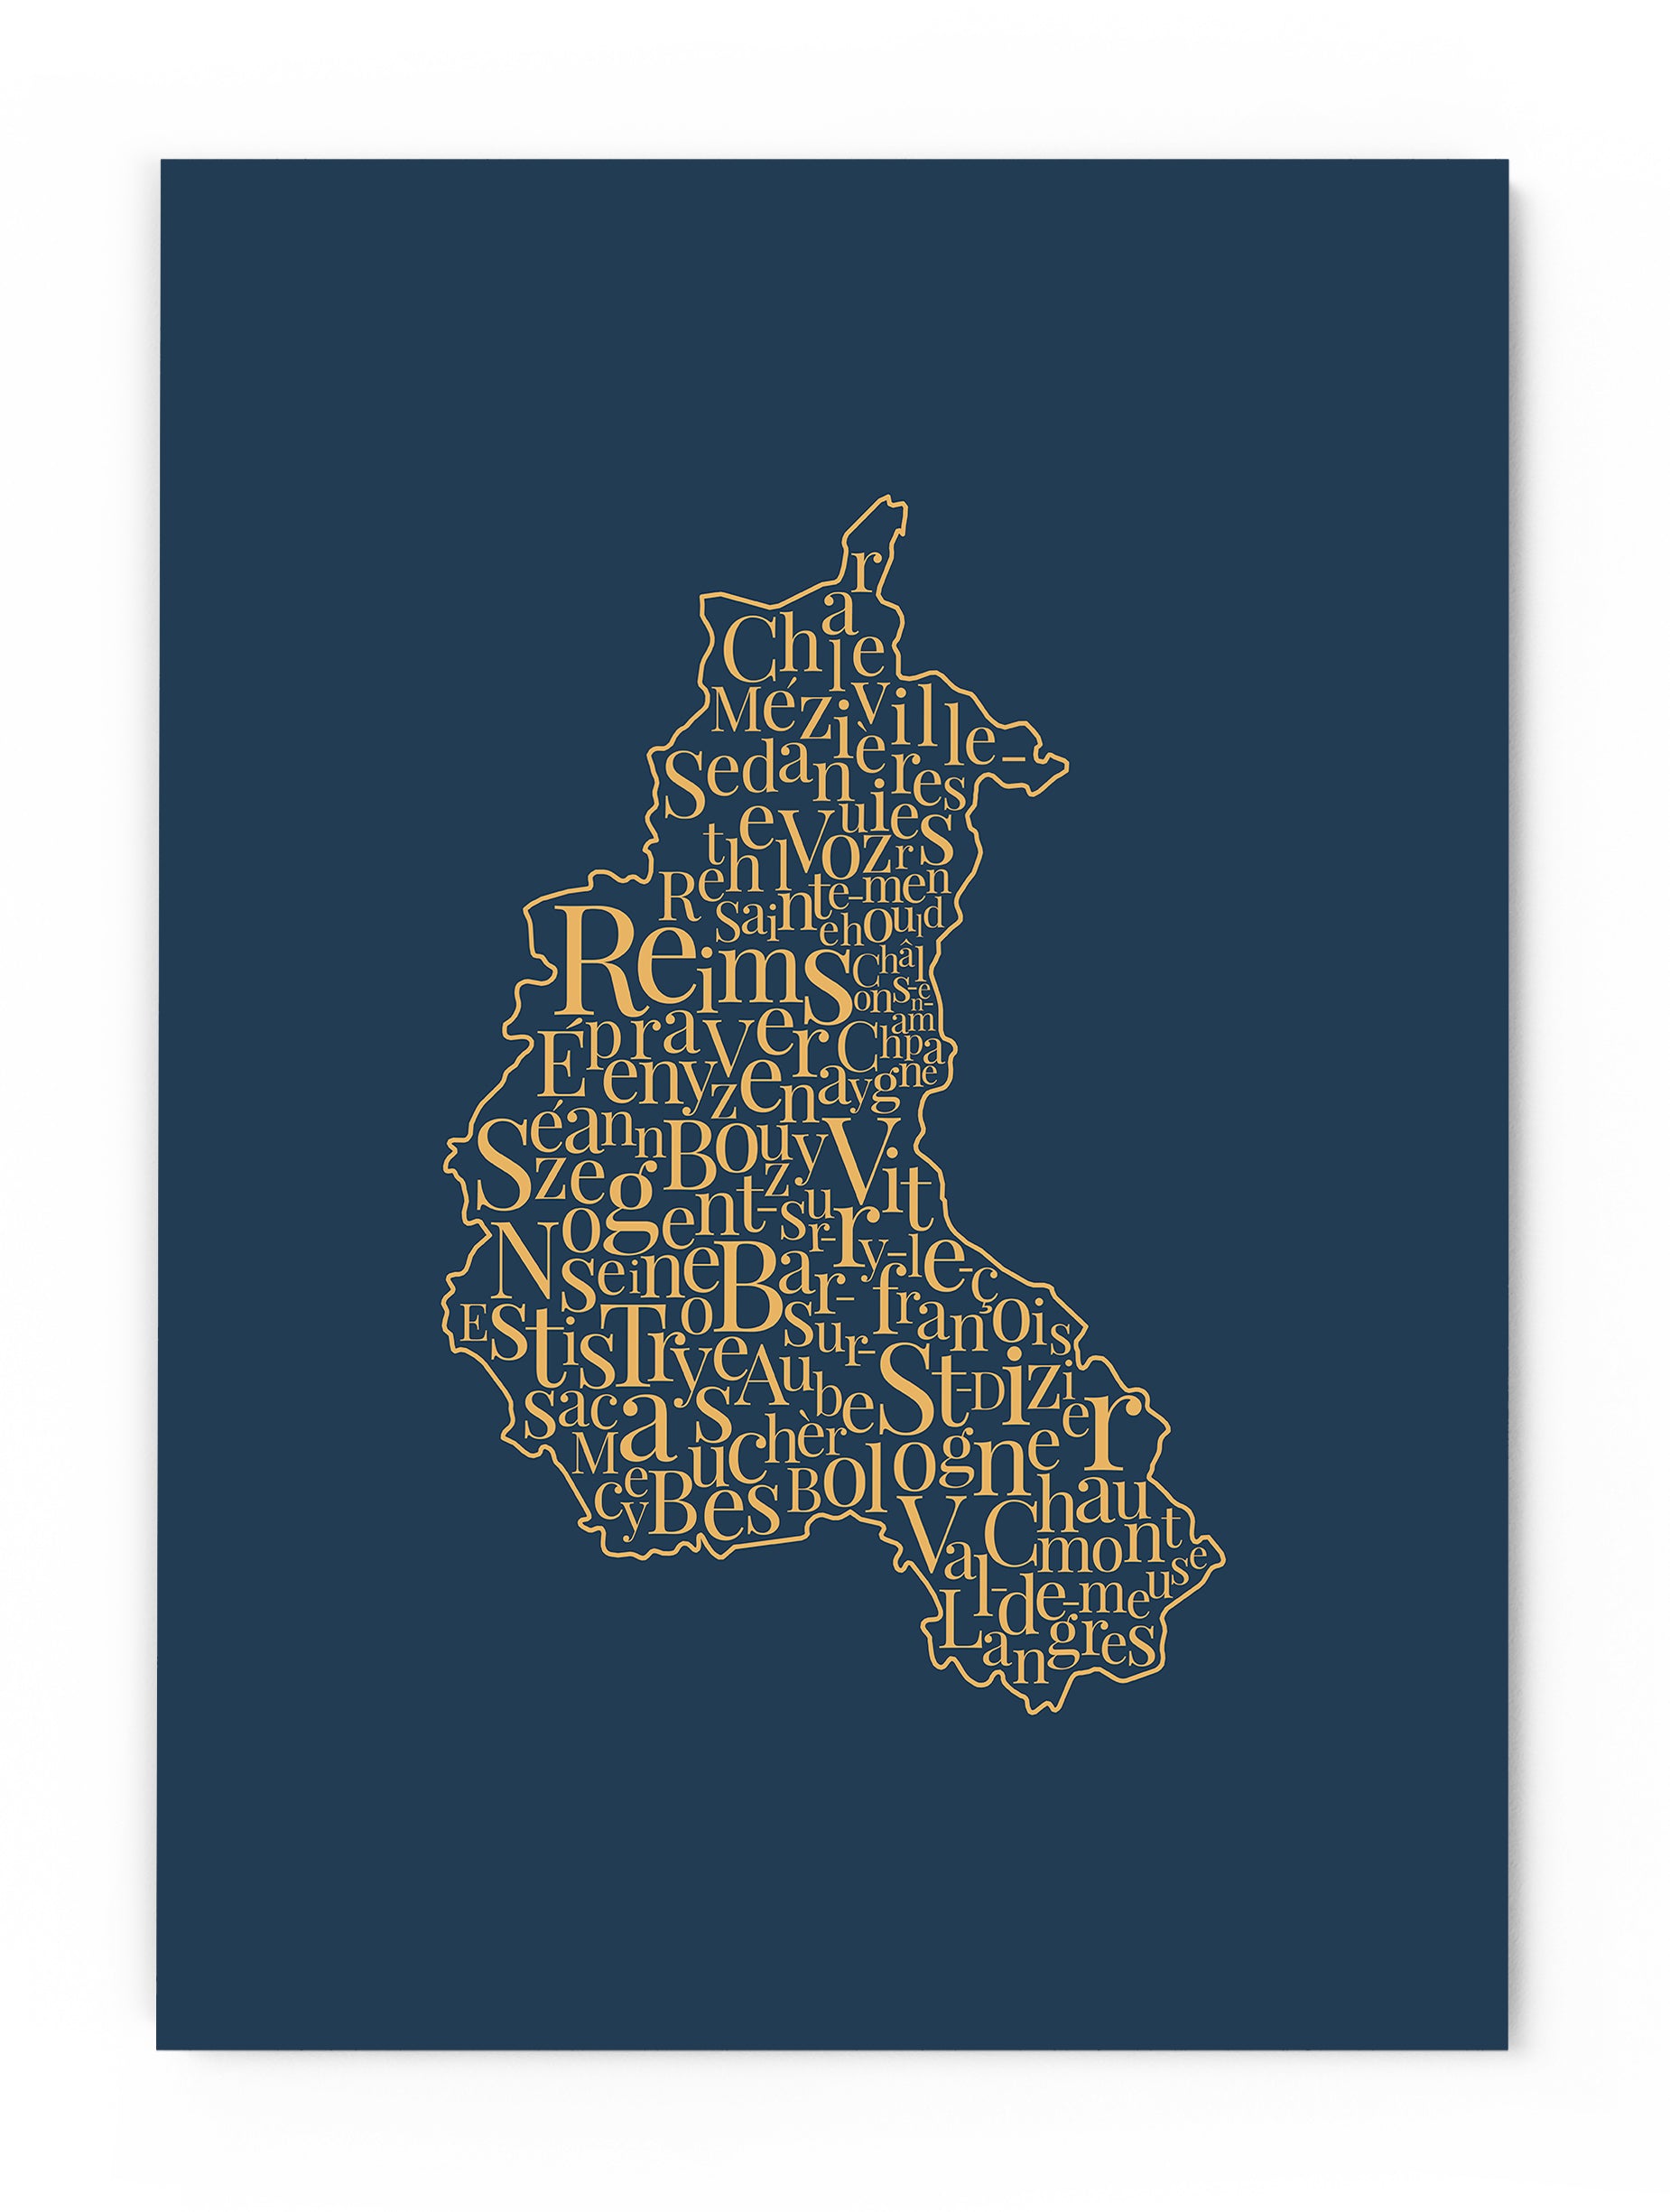 Champagne Region. Navy Blue and Gold. Fine art print. Champagne Poster.